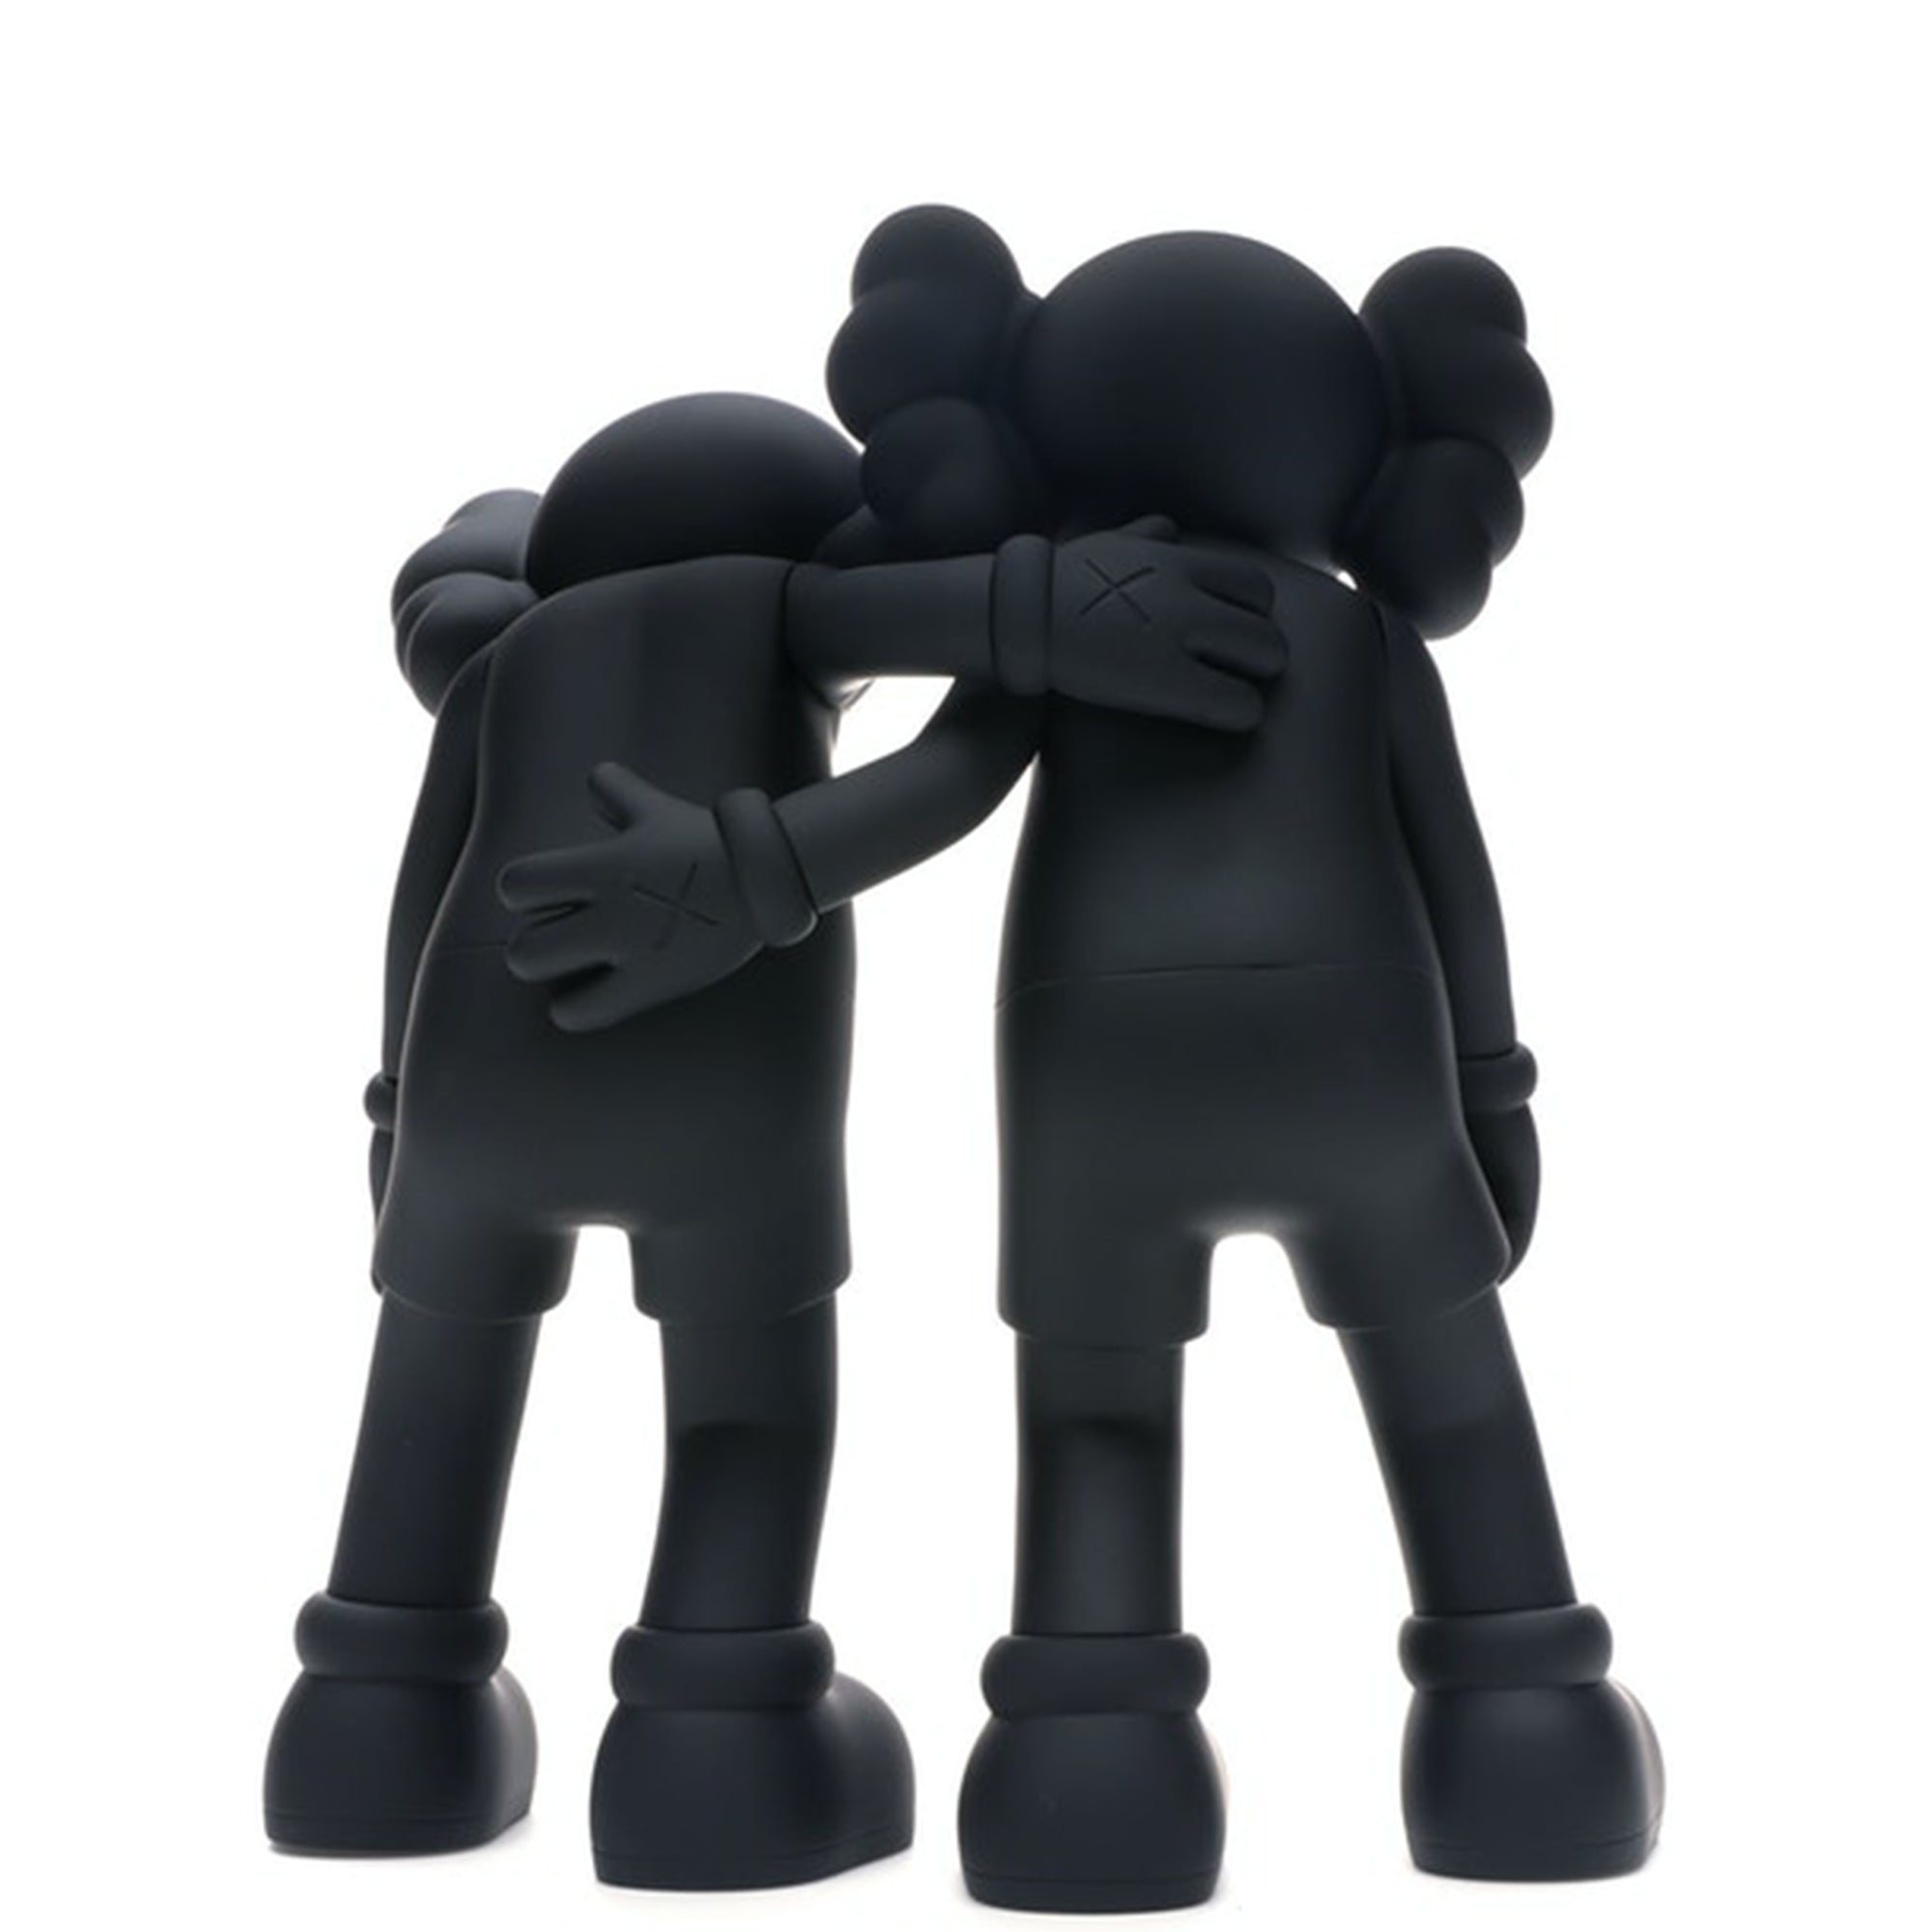 Kaws ALONG THE WAY Open Edition Black by Medicom Toy